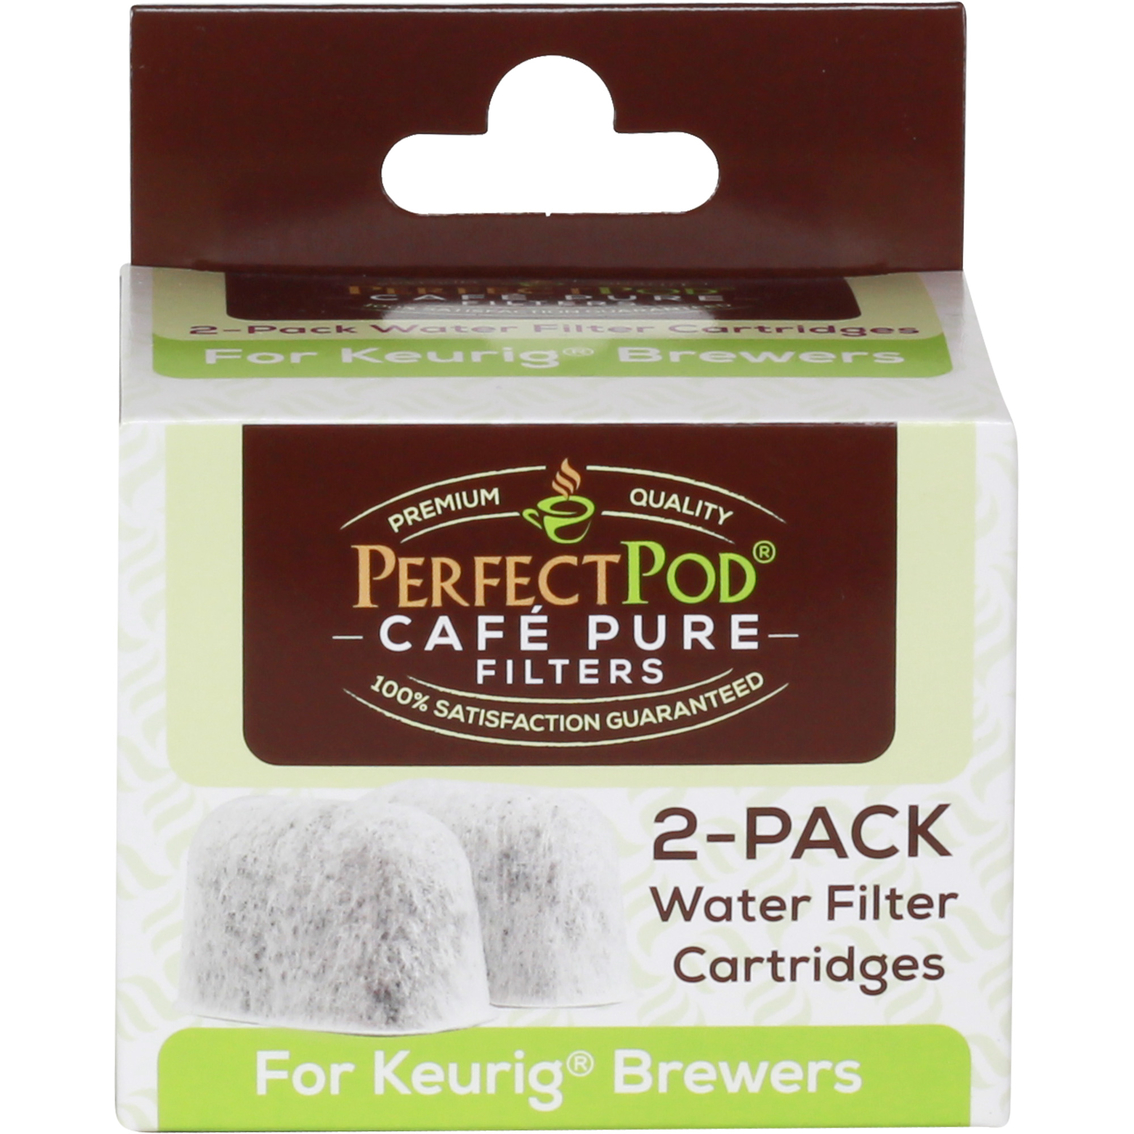 Cafe Pure 2 pk. Charcoal Filters by Perfect Pod - Image 2 of 2